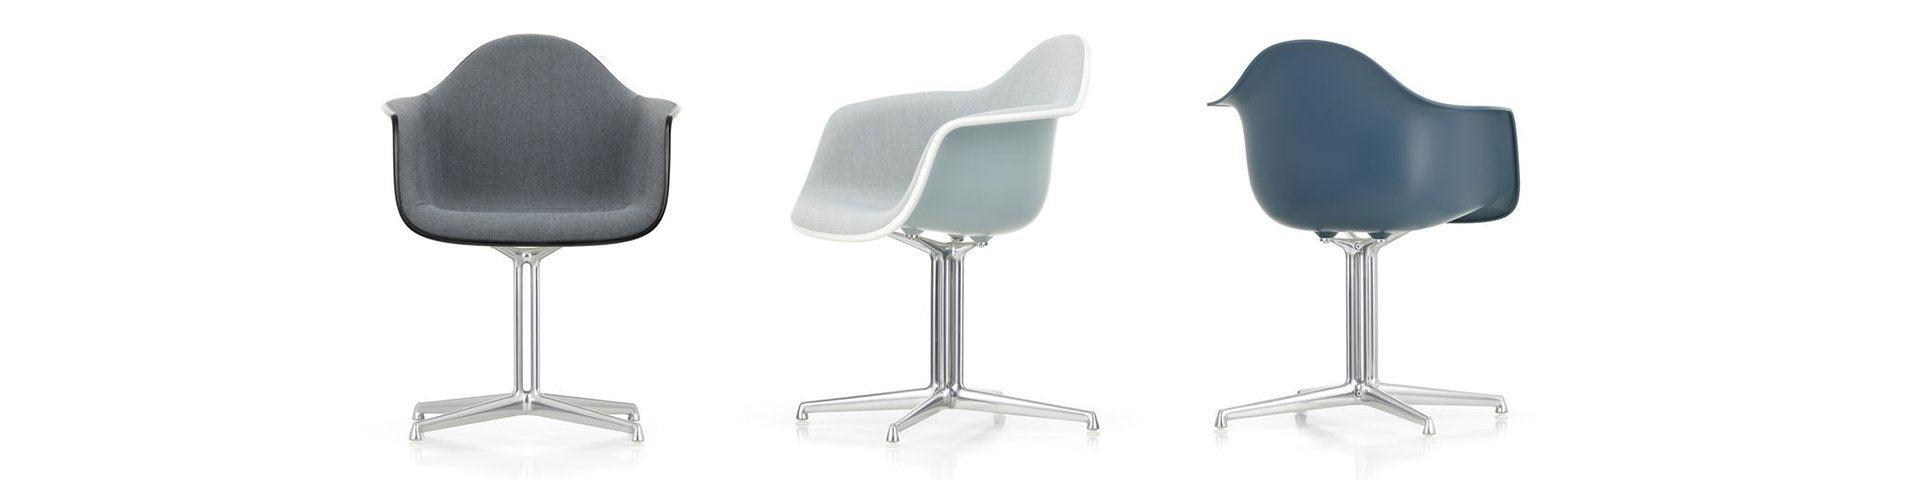 Eames RE DAL Armchair with Upholstery